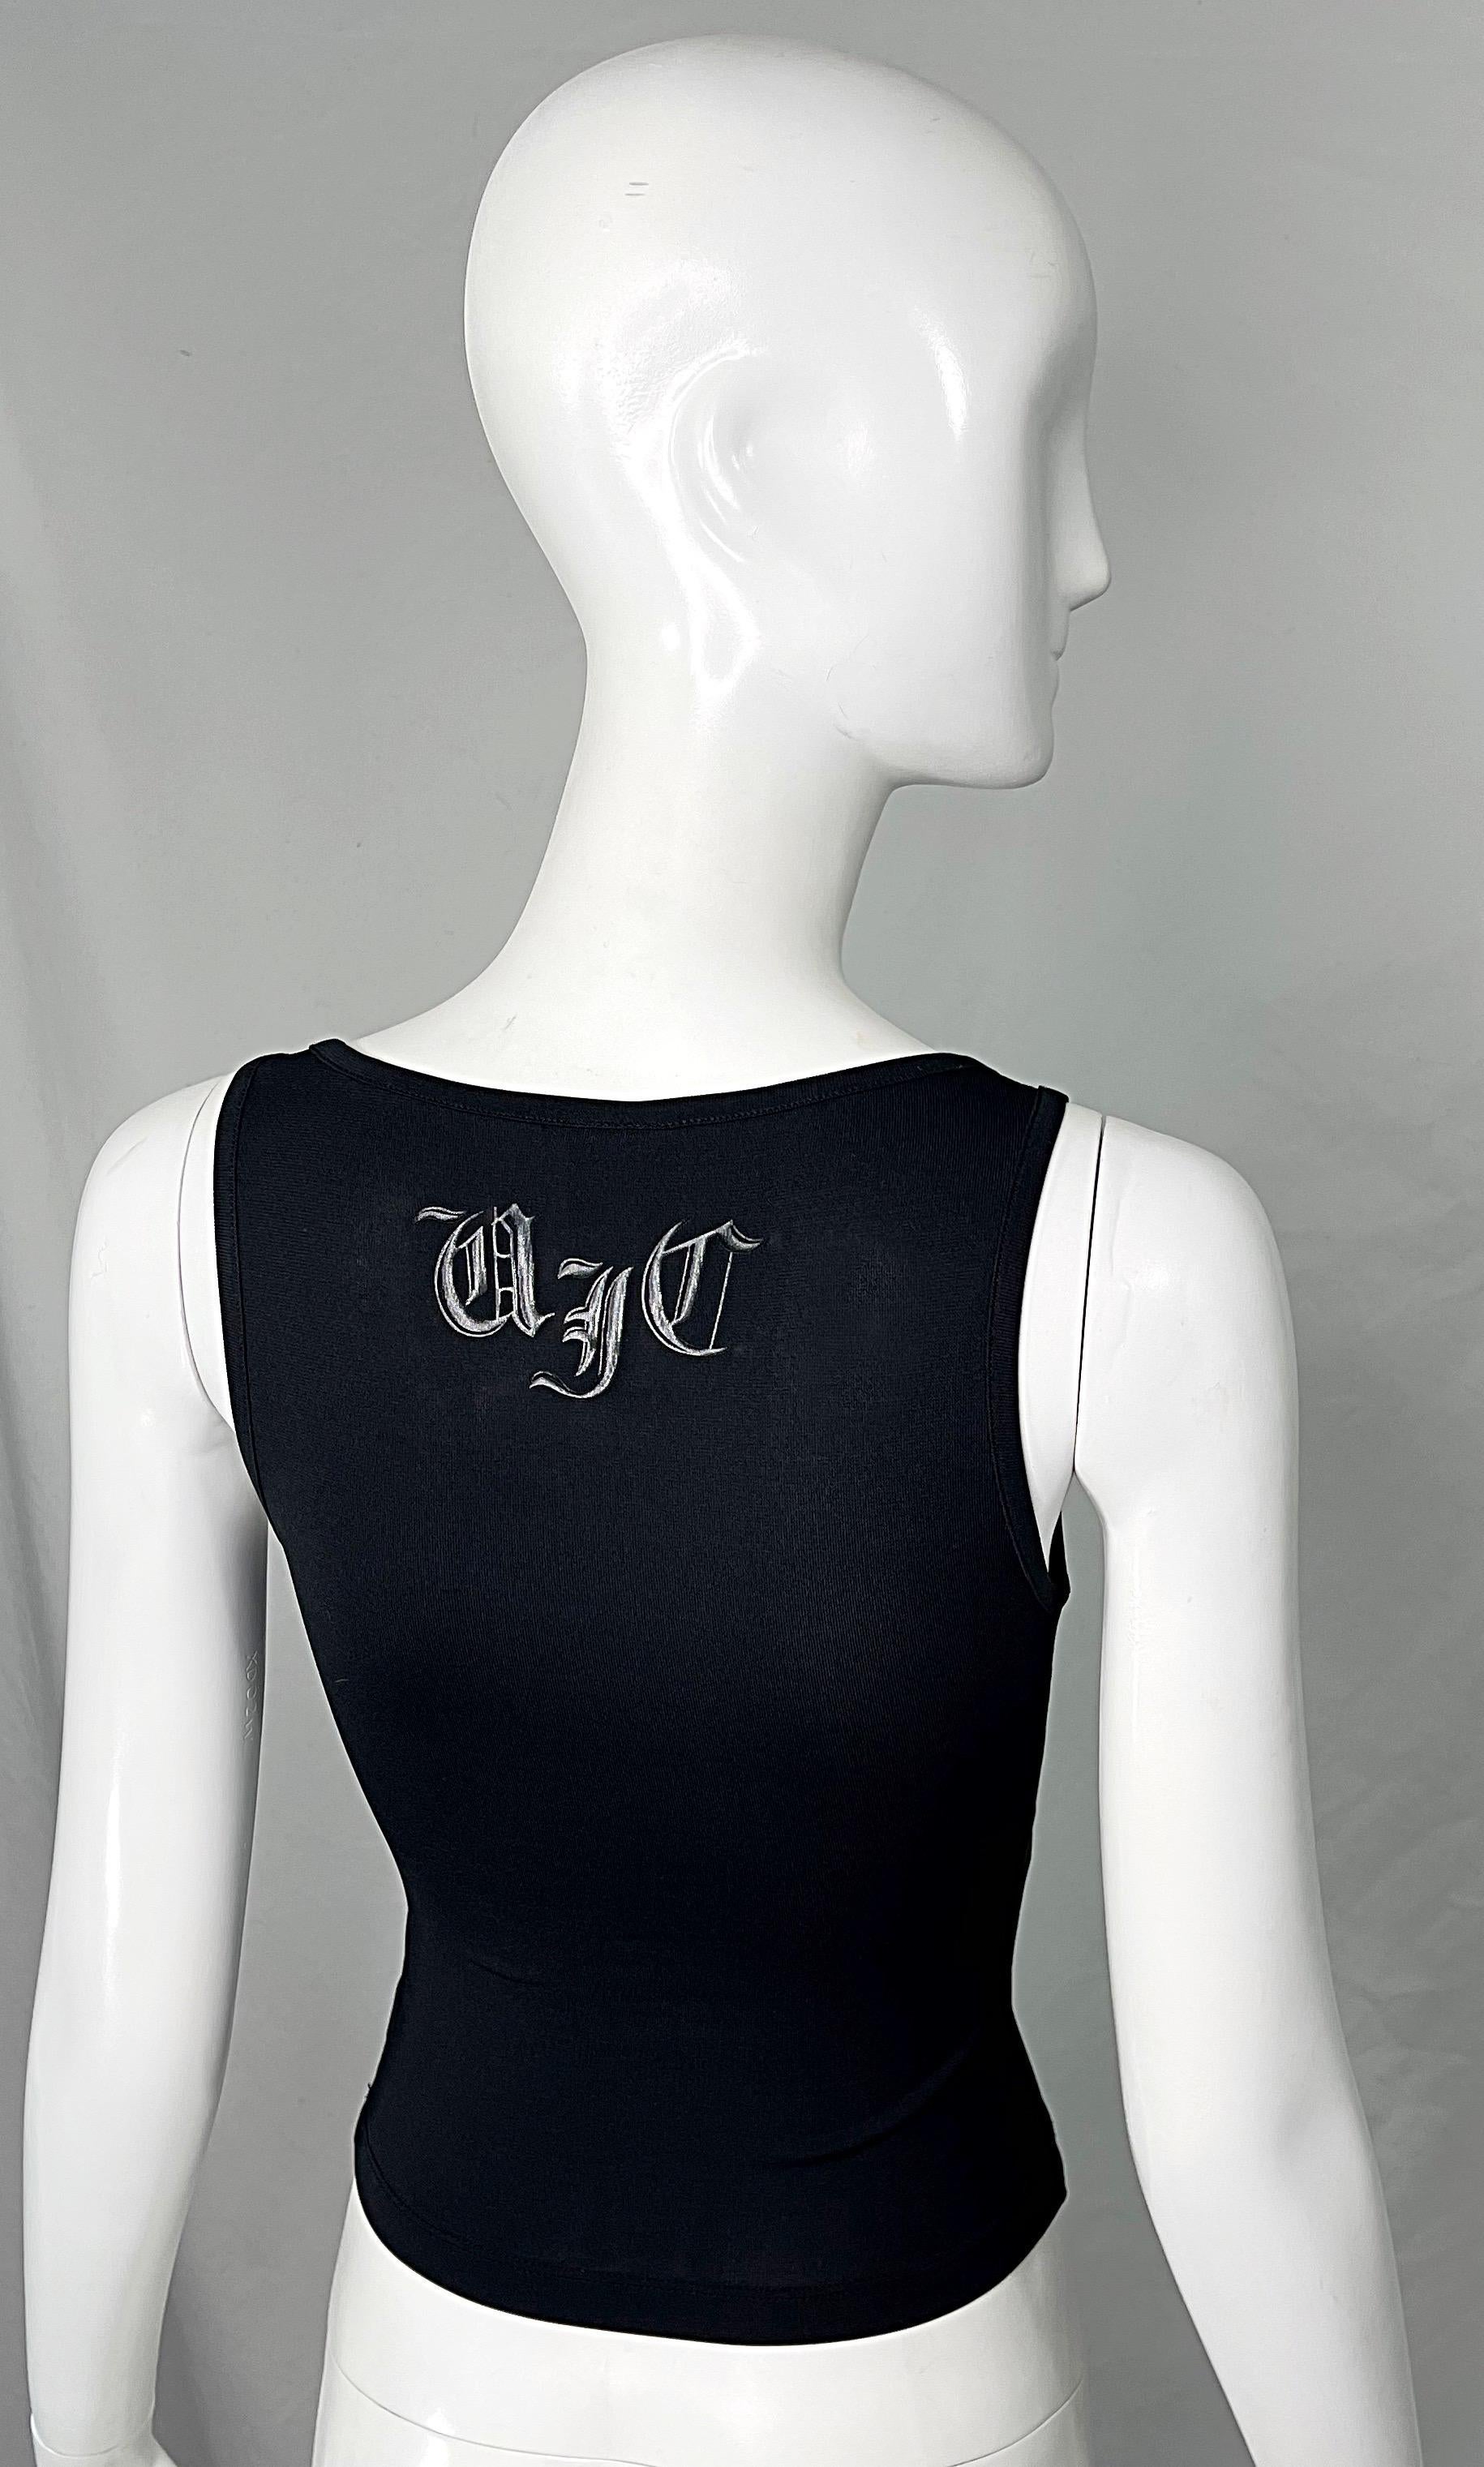 Women's 2000s Gianni Versace Black Cut - Out Logo Rayon Sexy Sleeveless Vintage 90s Top